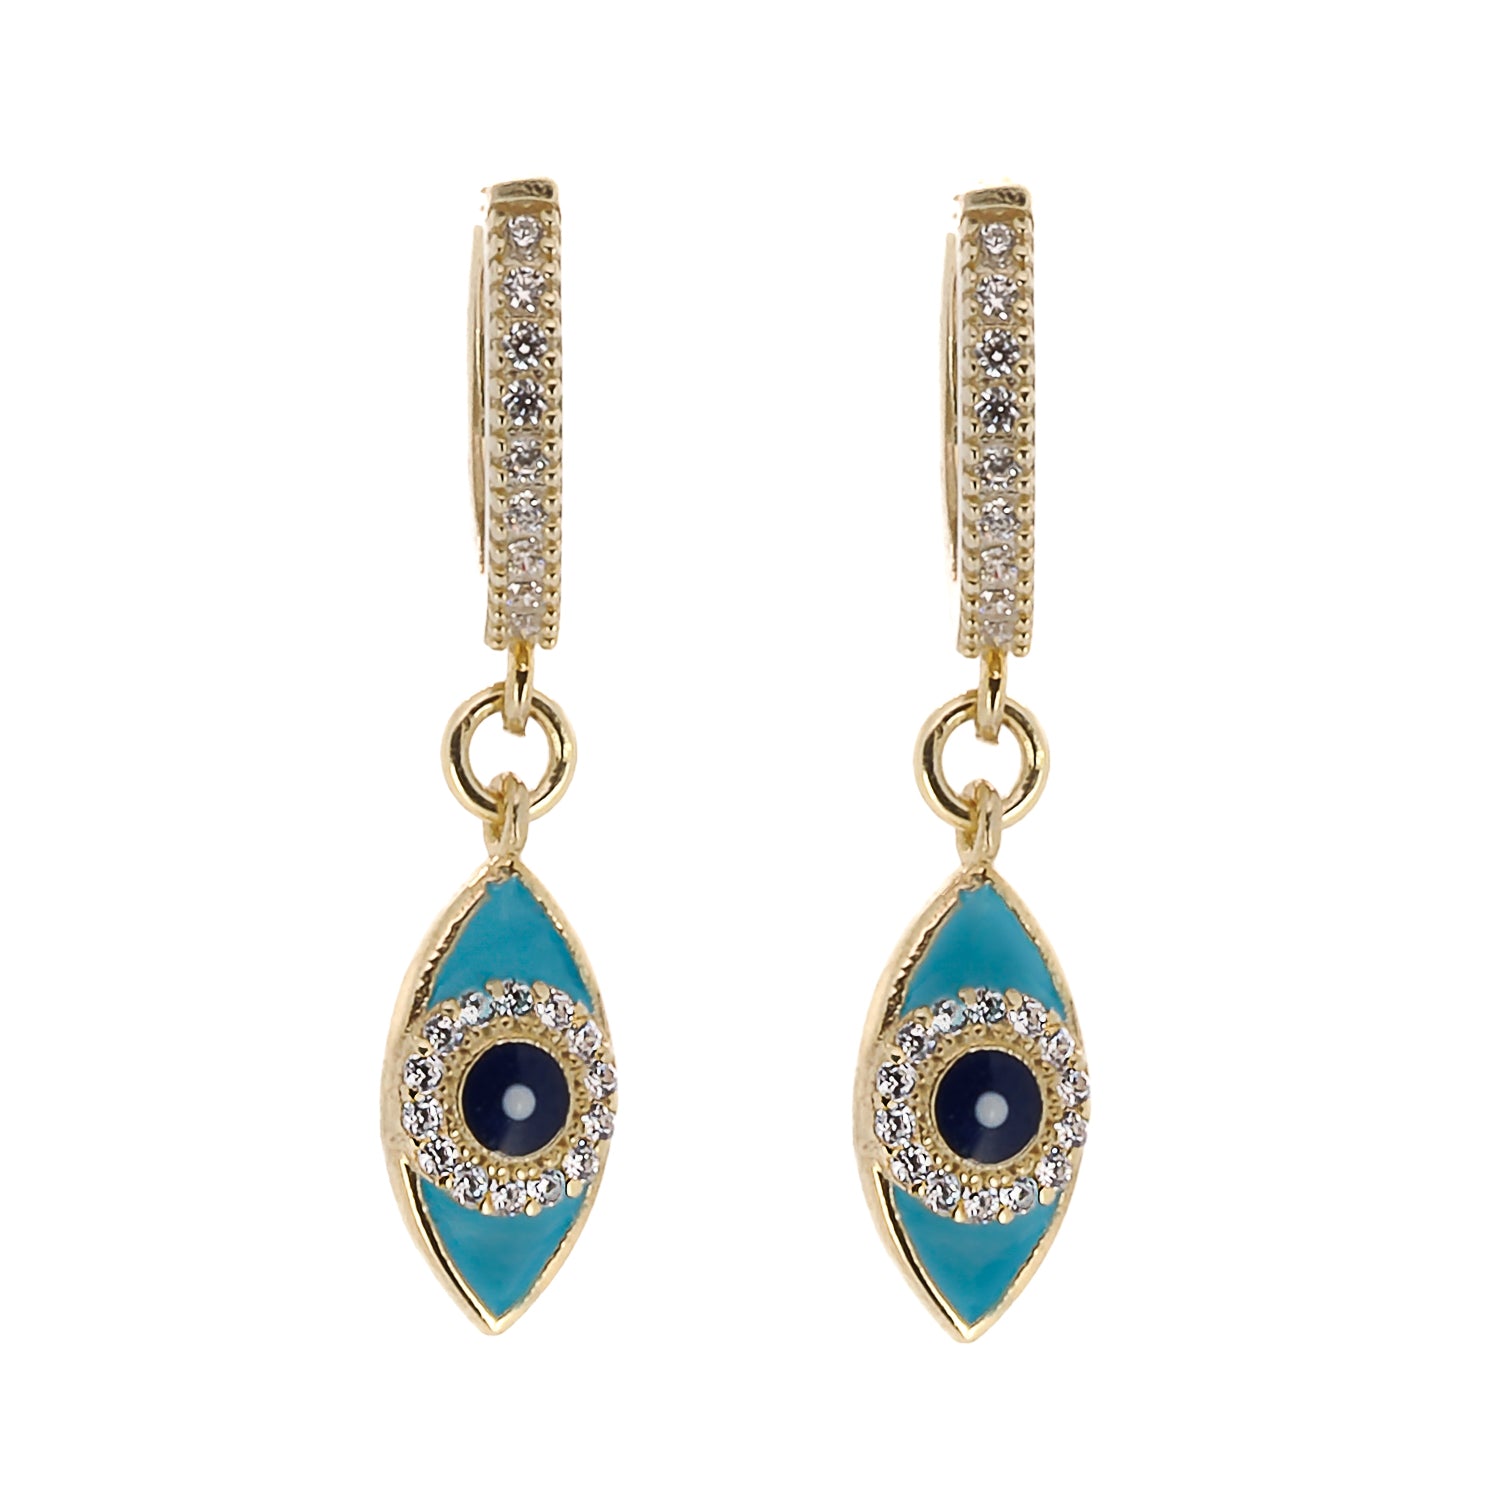 Turquoise Sparkly Gold Evil Eye Earrings with gold-plated sterling silver and zircon stones